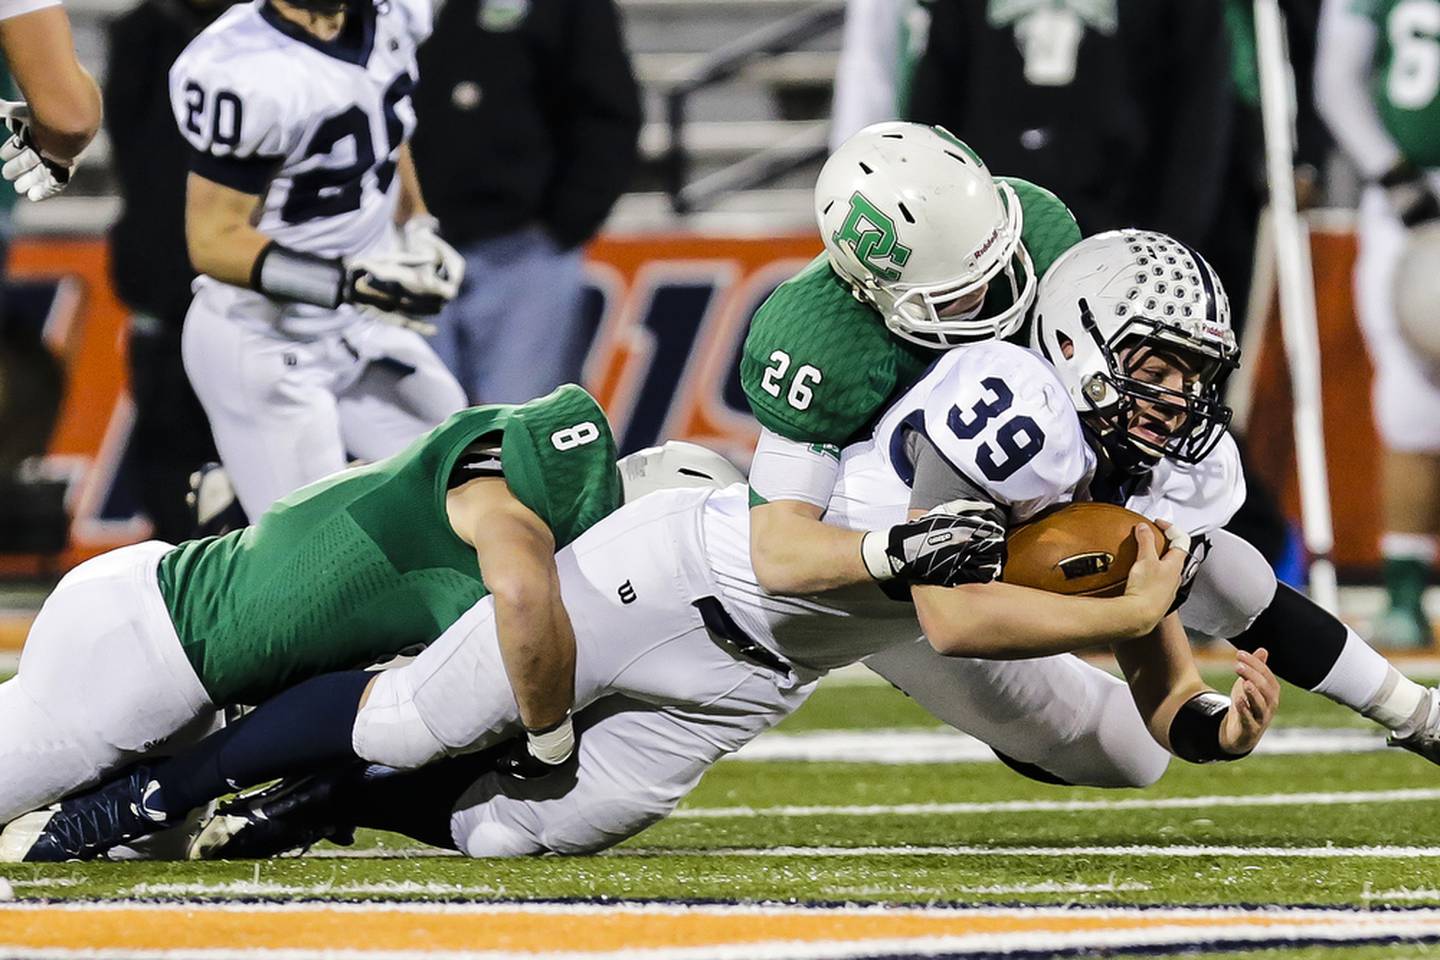 Cary-Grove's Tyler Pennington is tackled by Providence Catholic;s Emmer Trost(8) and Erik Carroll(26) during the first half of the IHSA class 7A state championship game at the University of Illinois Urbana-Champaign, Saturday, Nov. 29, 2014, in Champaign, Ill.